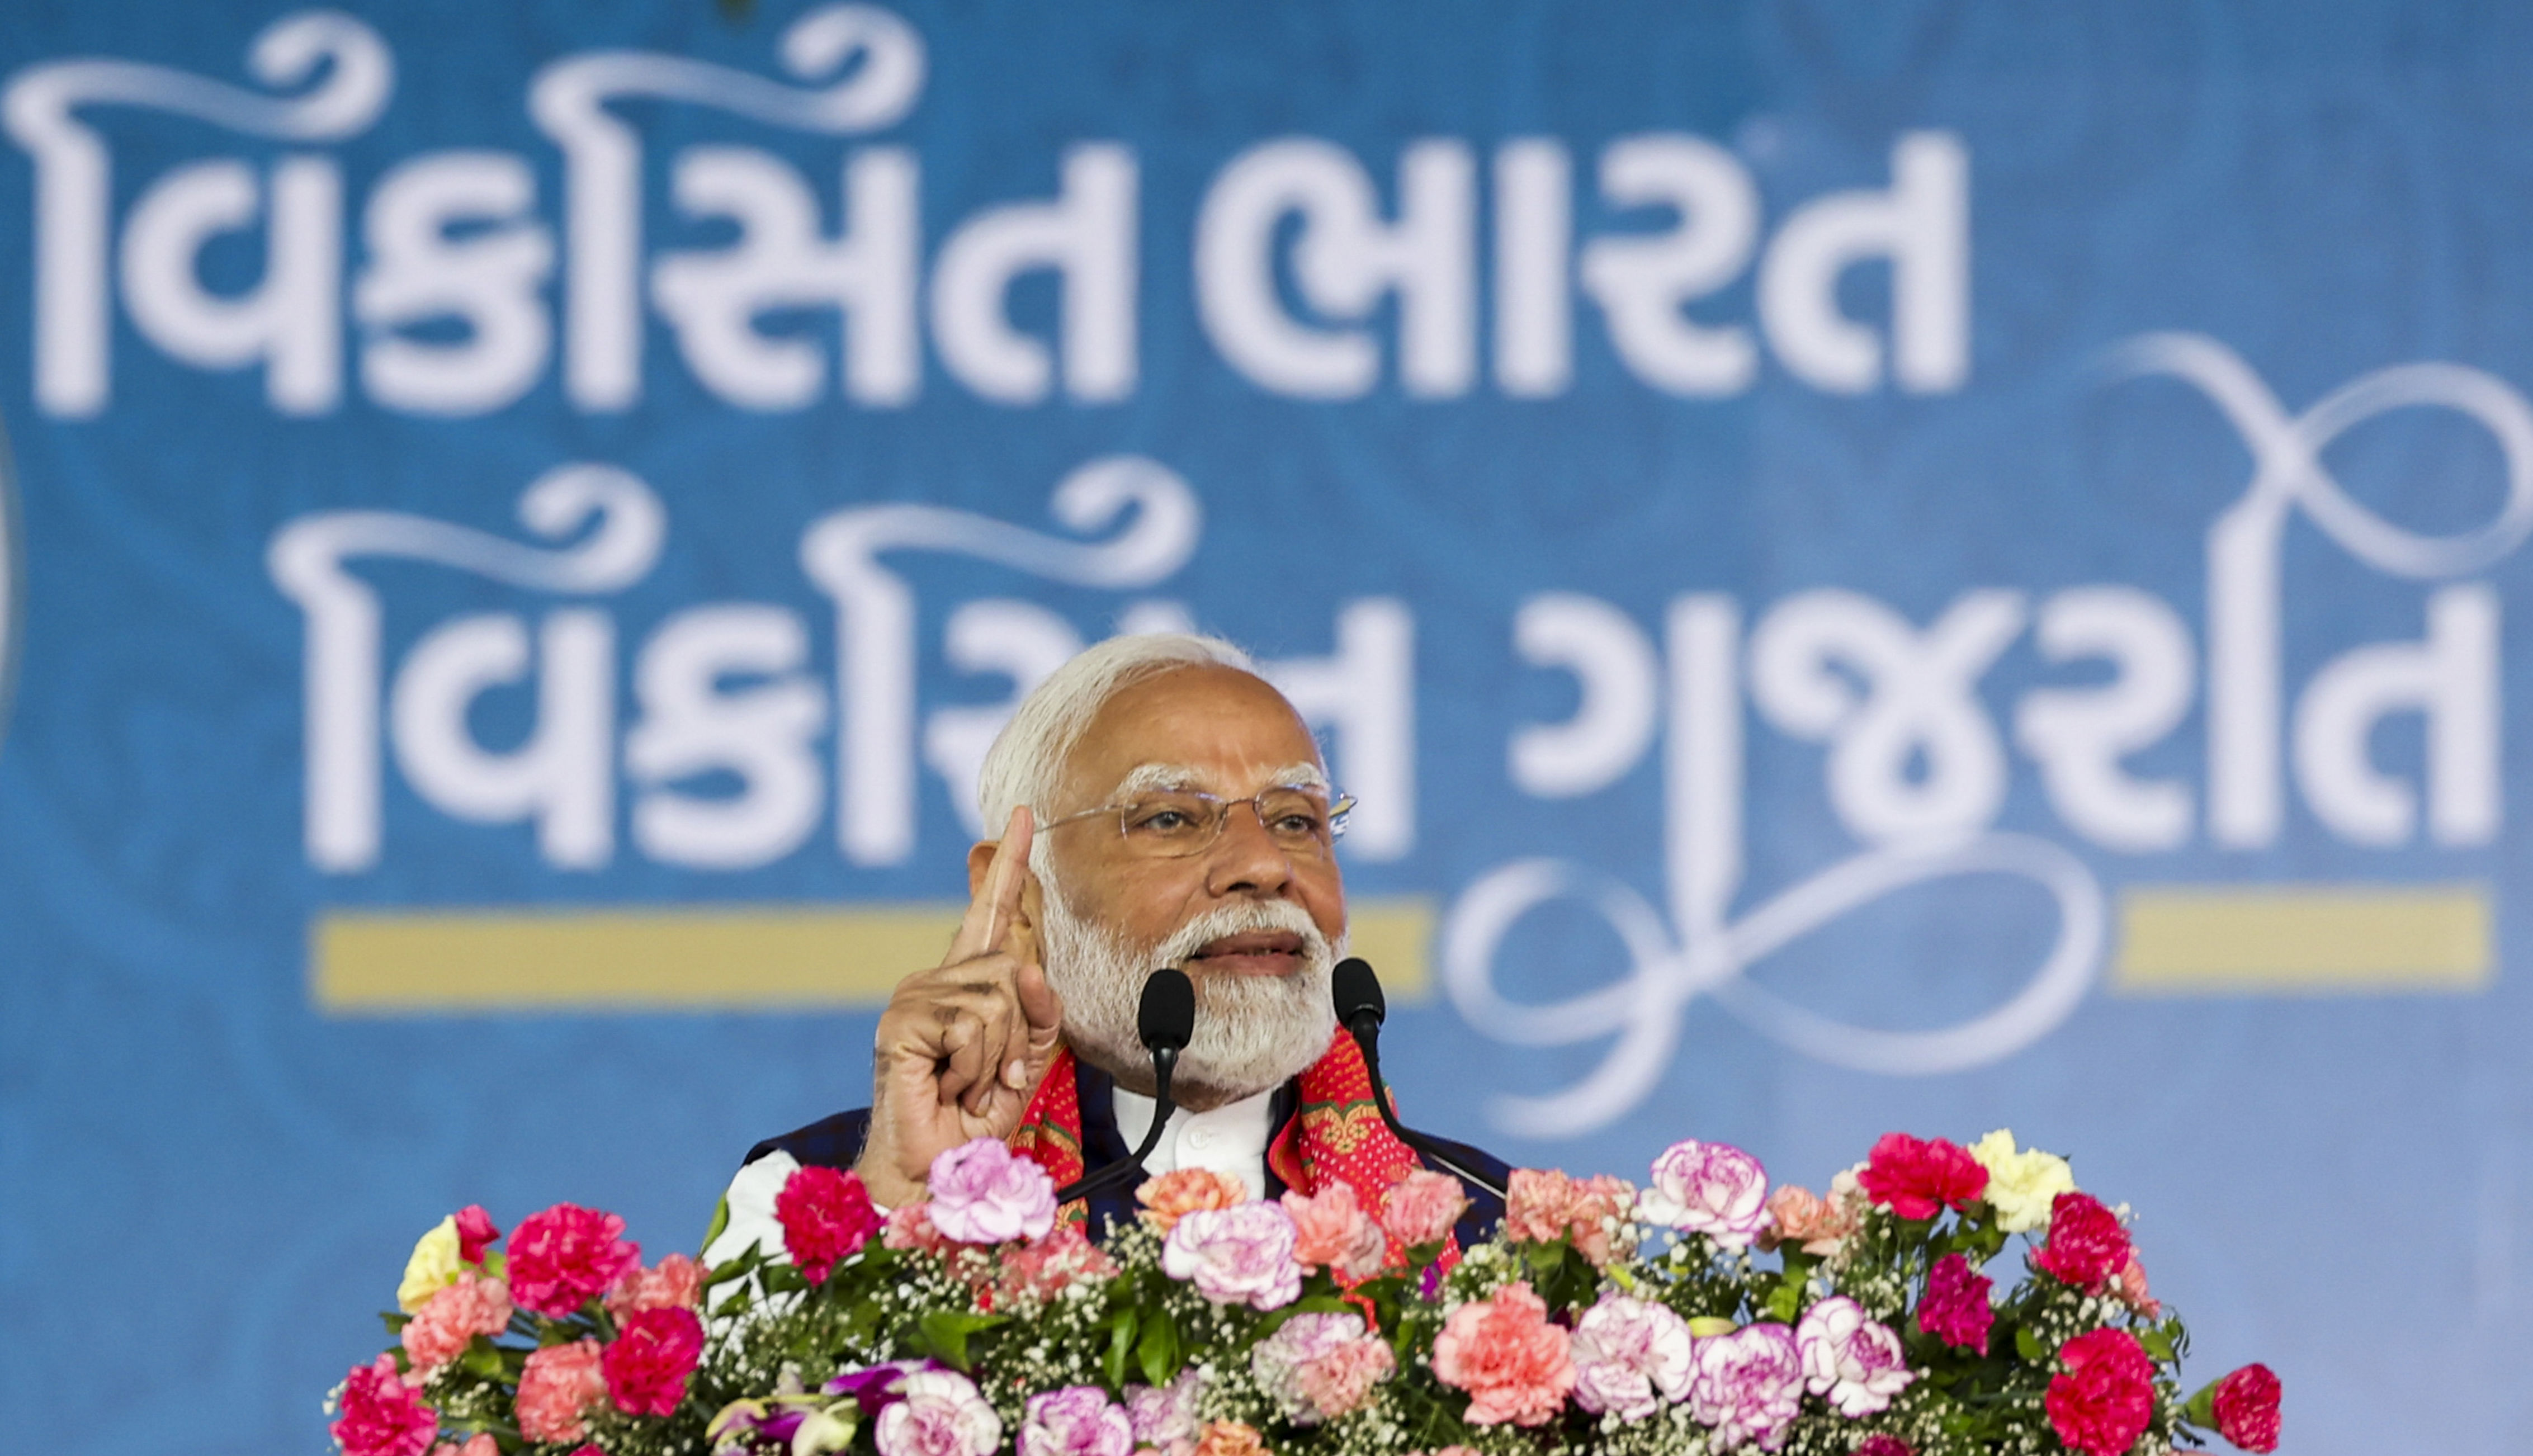 divine experience, says pm modi after scuba diving to perform prayers at ancient dwarka city